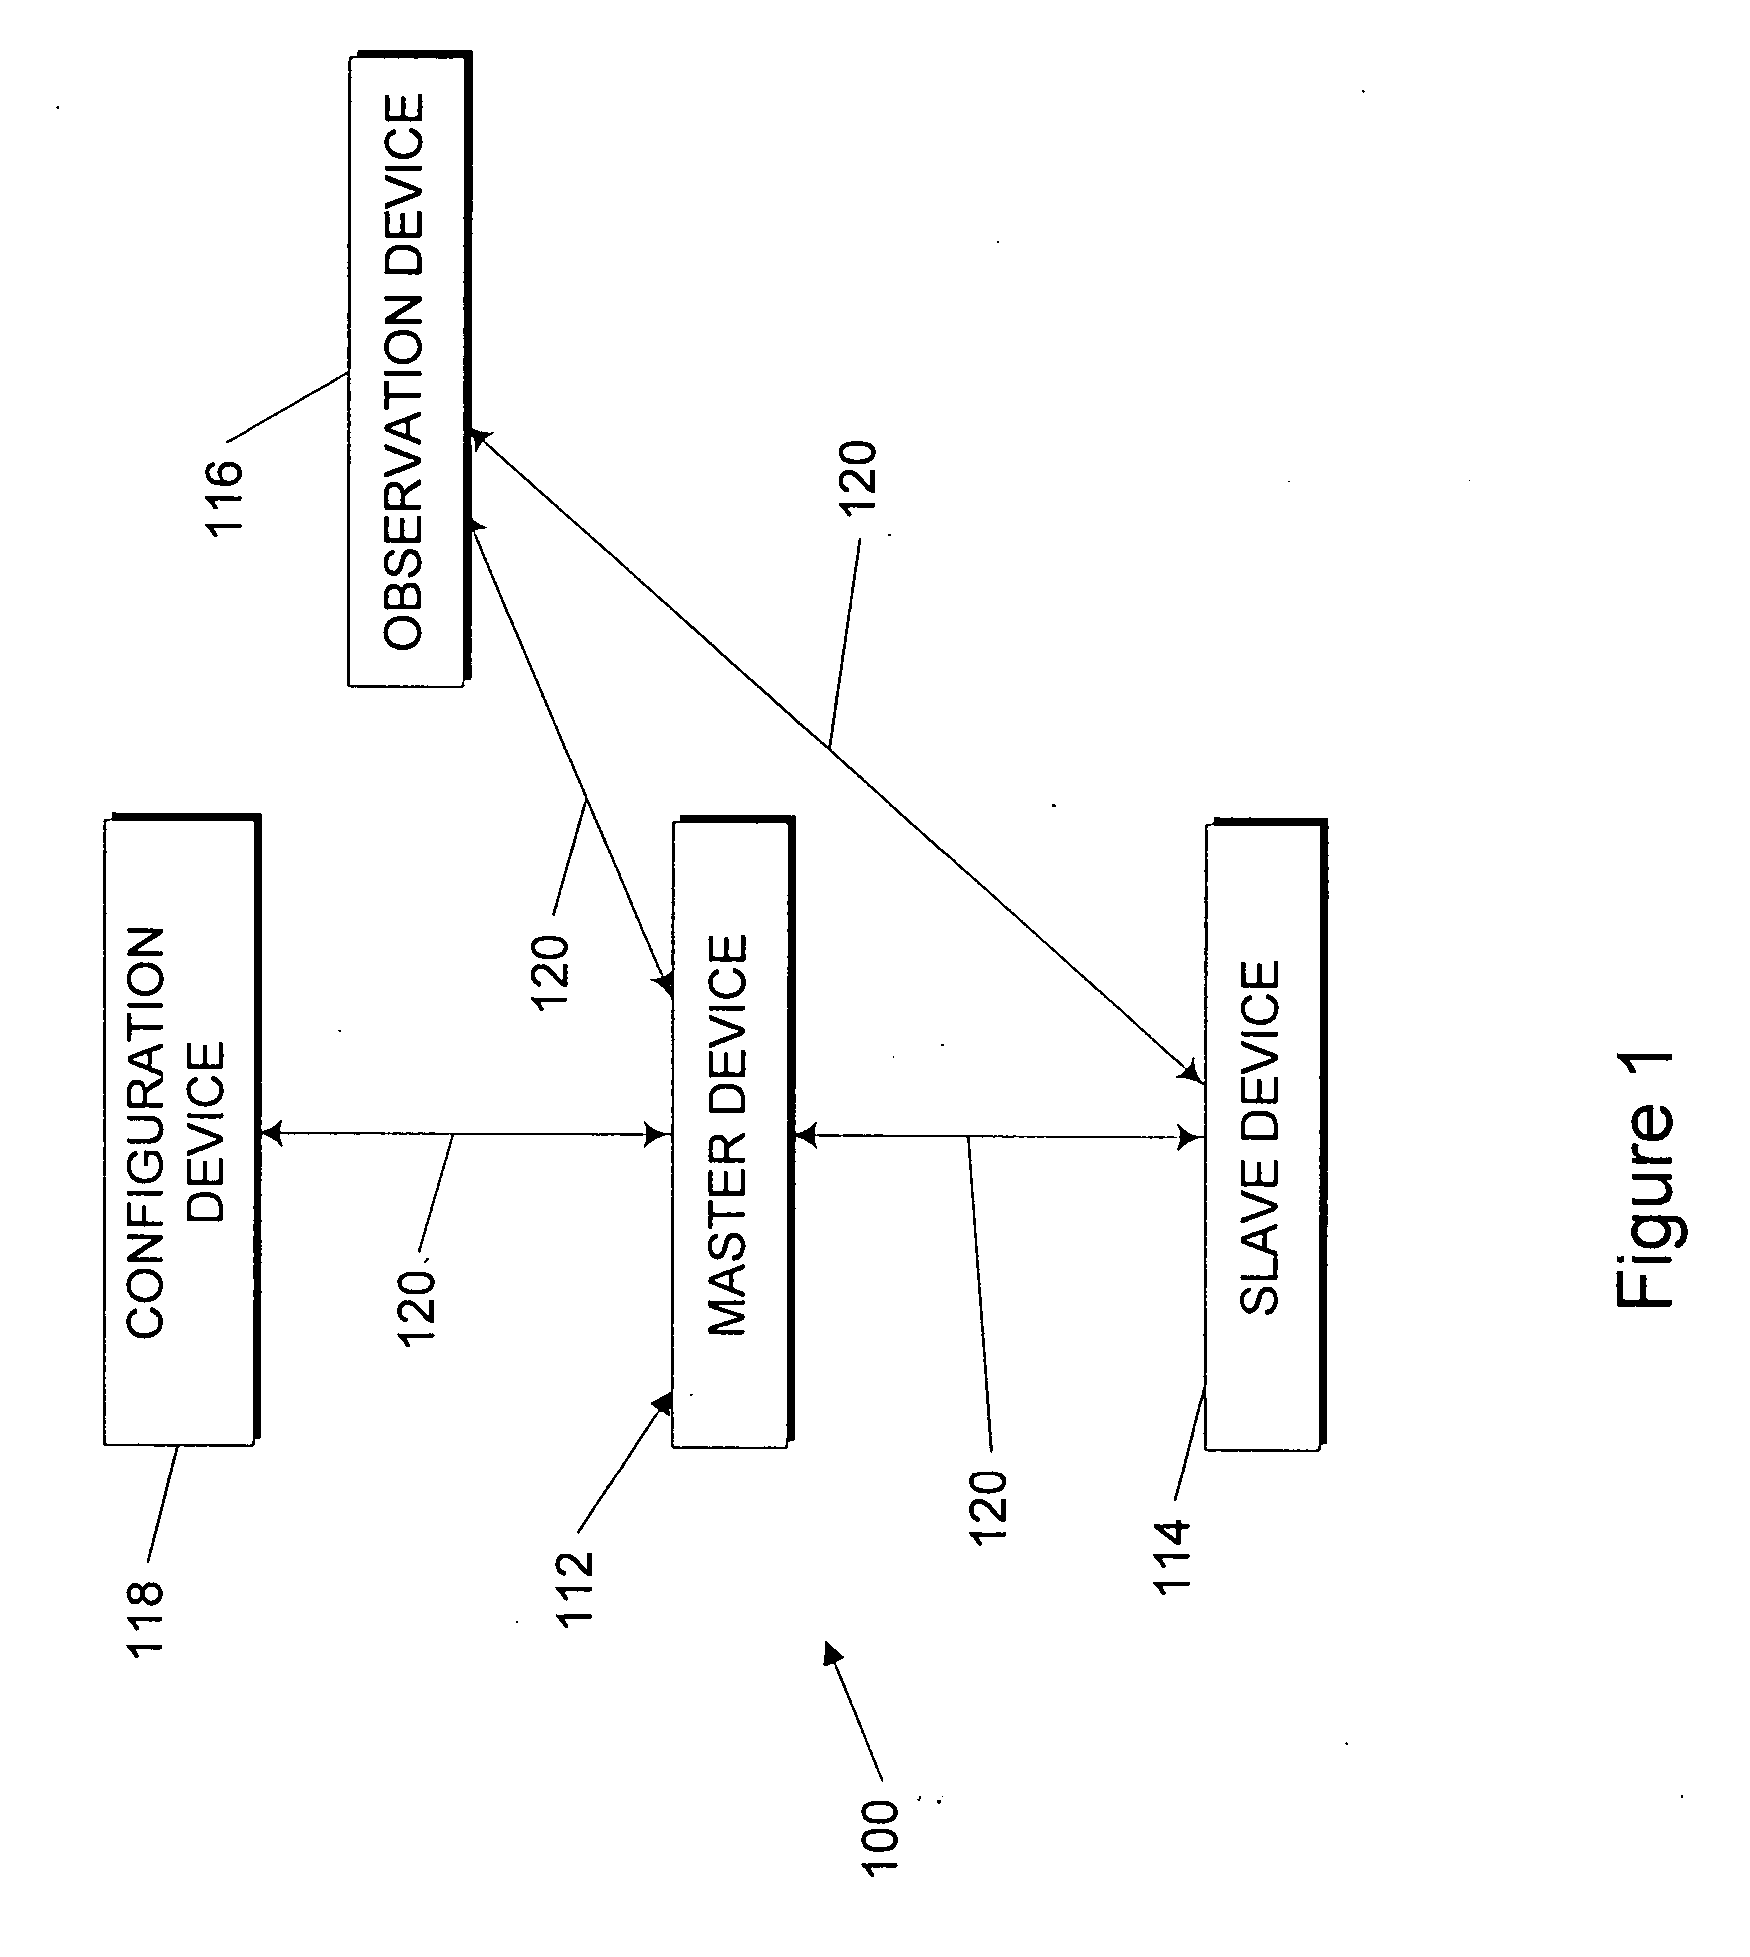 System and method of synchronizing mechatronic devices